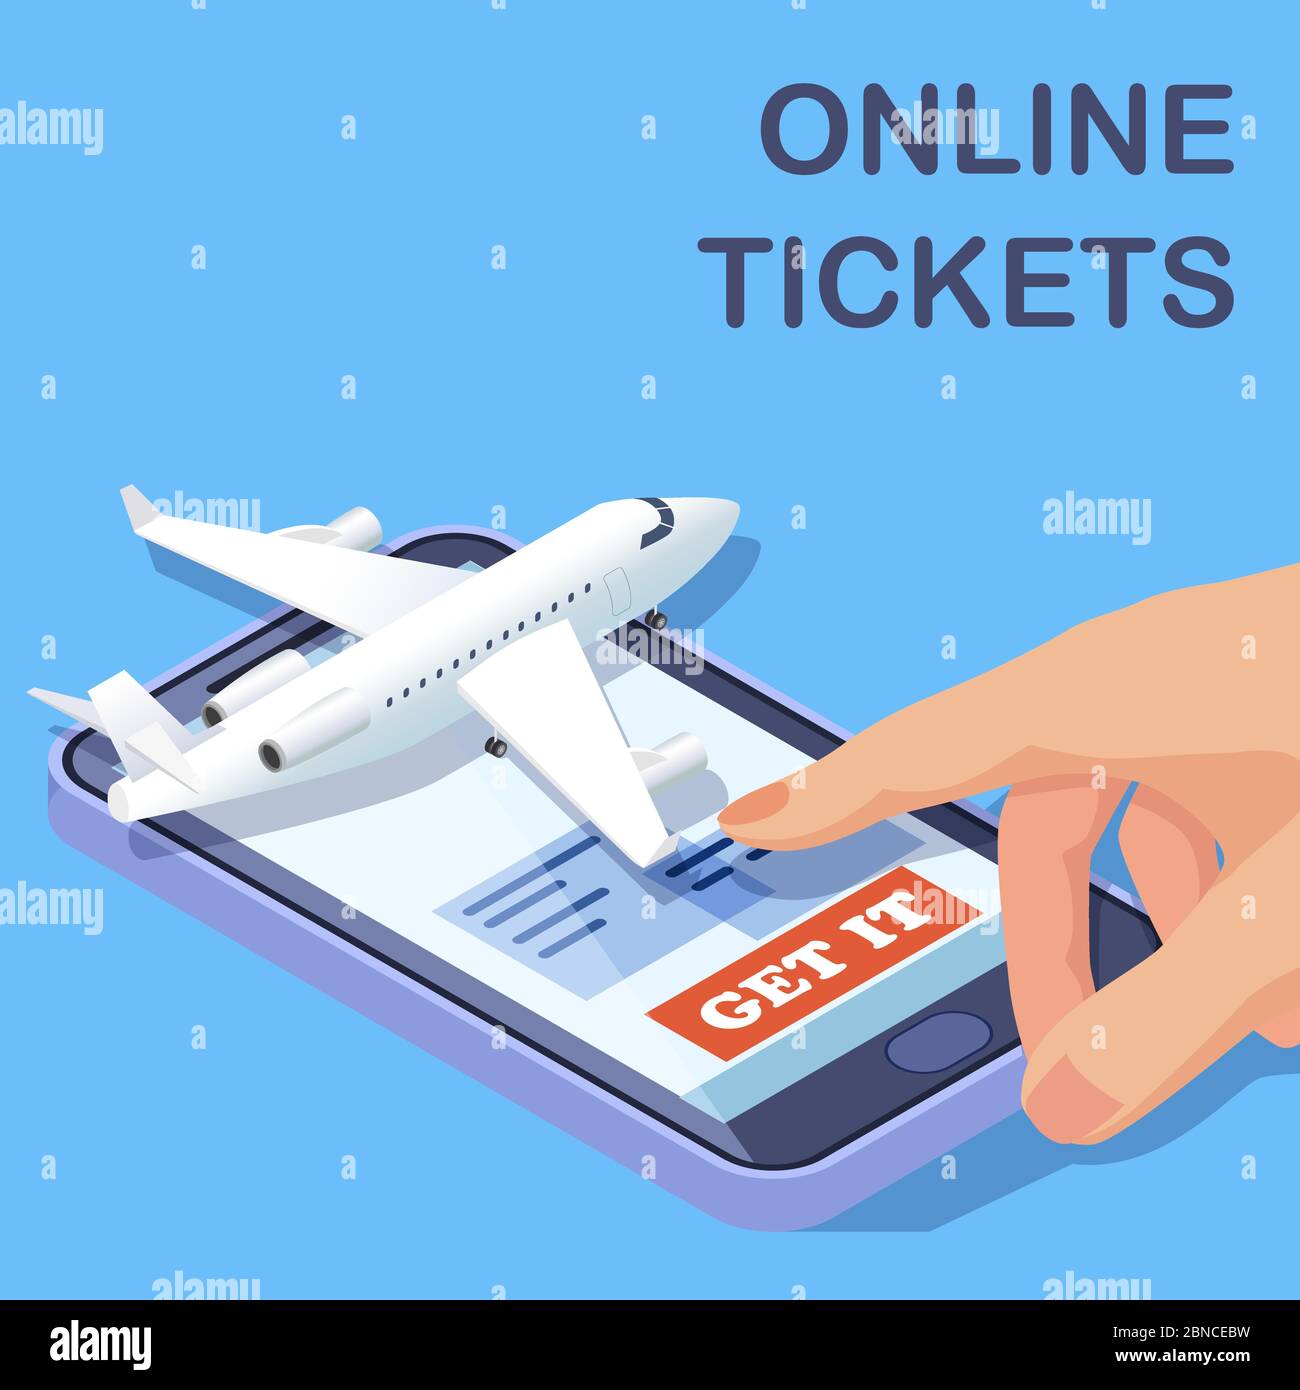 Airline online tickets mobile app isometric vector concept. Illustration of online buy tickets to airplane Stock Vector